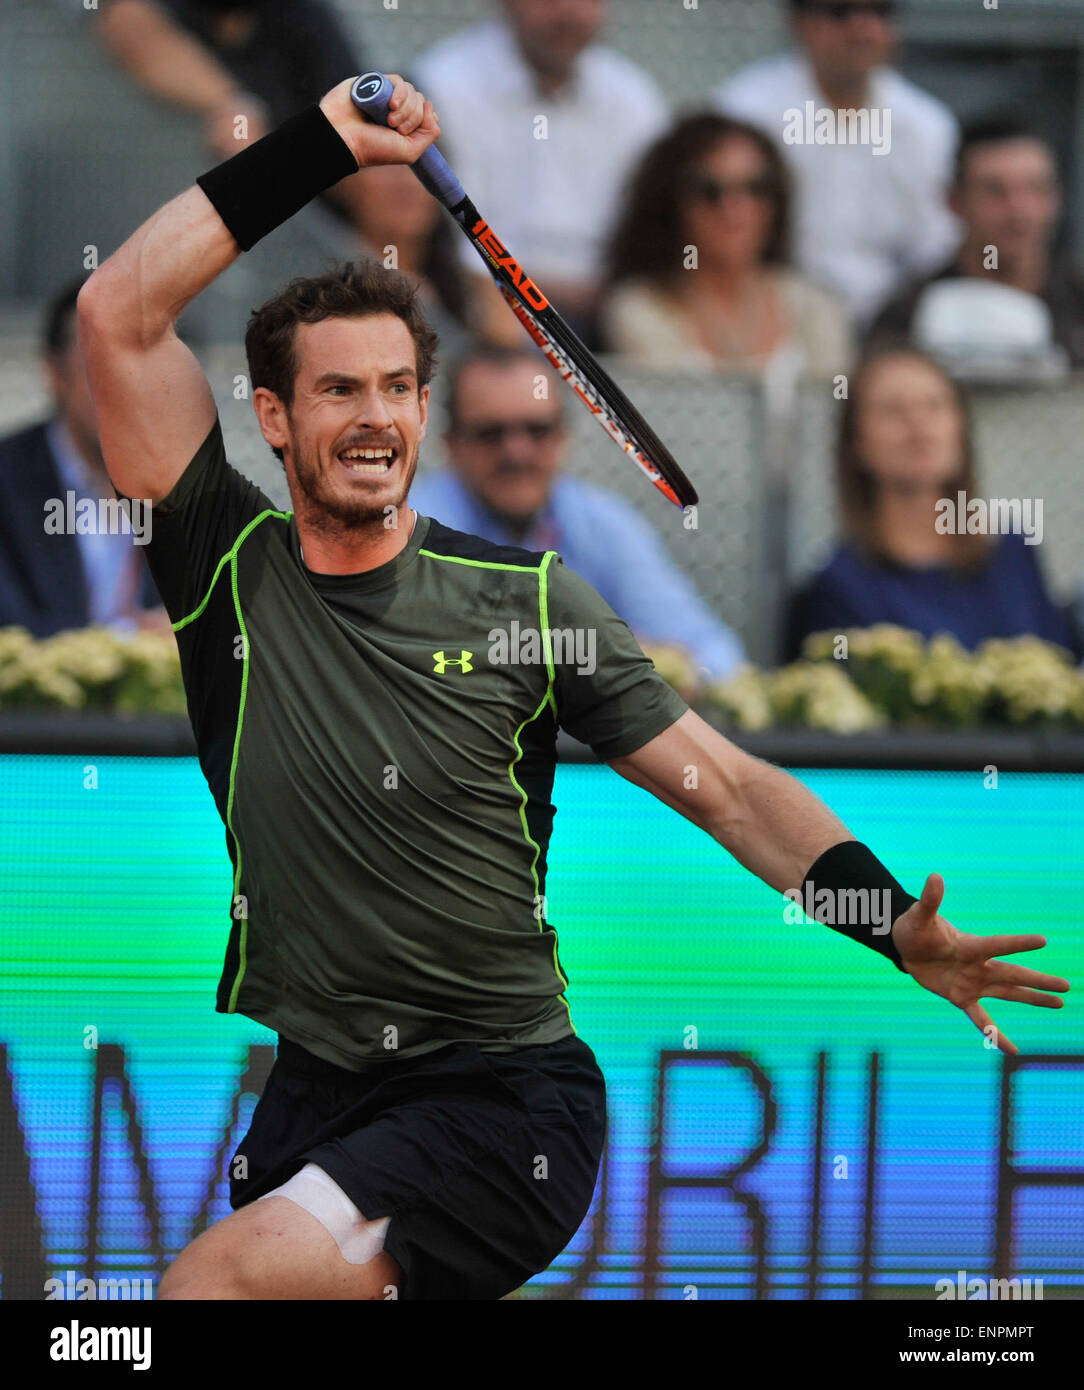 Madrid, Spain. 9th May, 2015. Andy Murray of Britain hits a return during a men's singles semifinal match against Kei Nishikori of Japan at the Madrid Open tennis tournament in Madrid, Spain, May 9, 2015. Andy Murray won 2-0. Credit:  Xie Haining/Xinhua/Alamy Live News Stock Photo